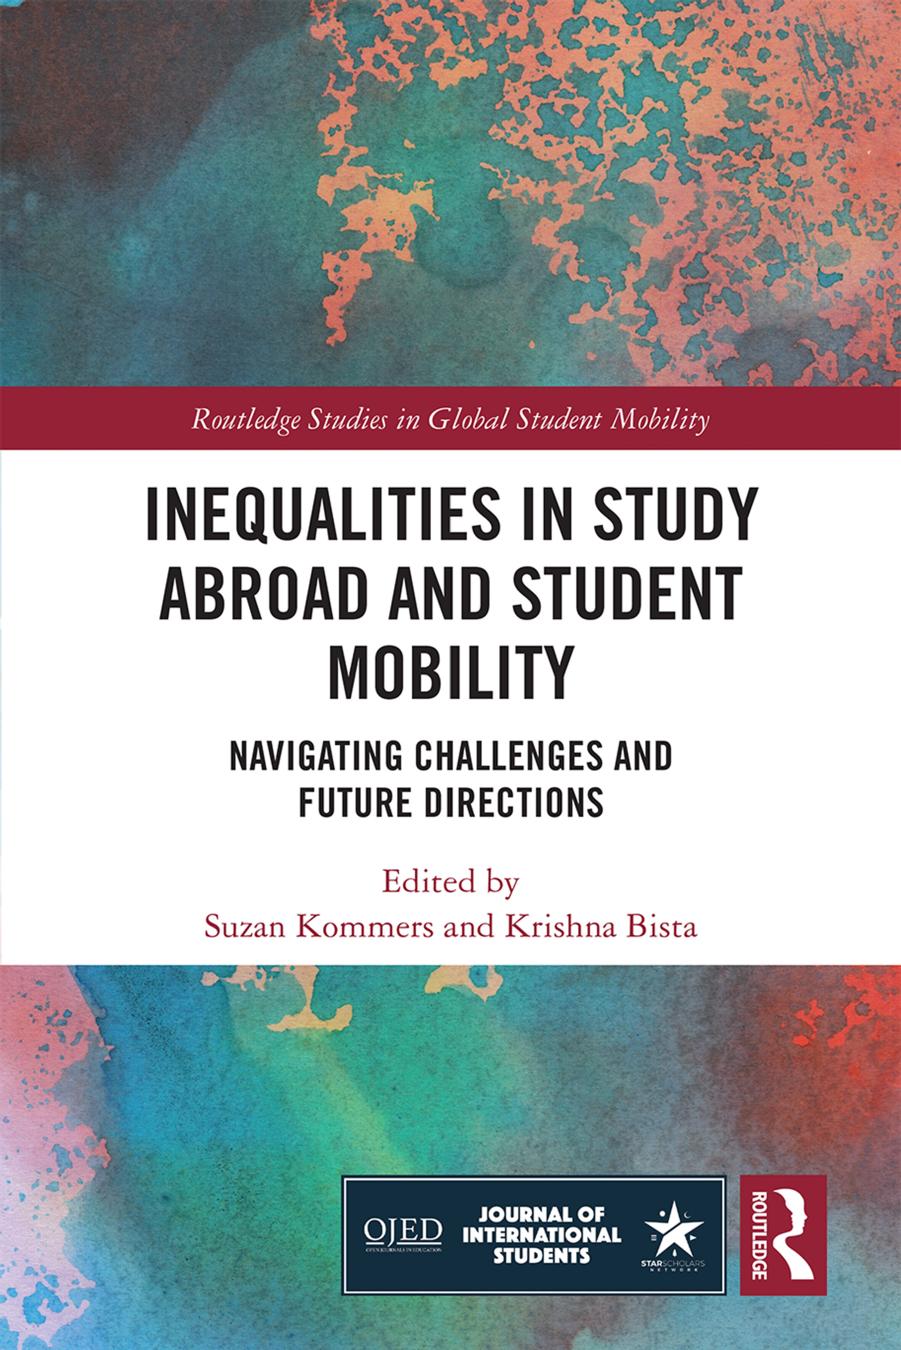 Inequalities in Study Abroad and Student Mobility: Navigating Challenges and Future Directions (Routledge Studies in Global Student Mobility) by Suzan Kommers , Krishna Bista 